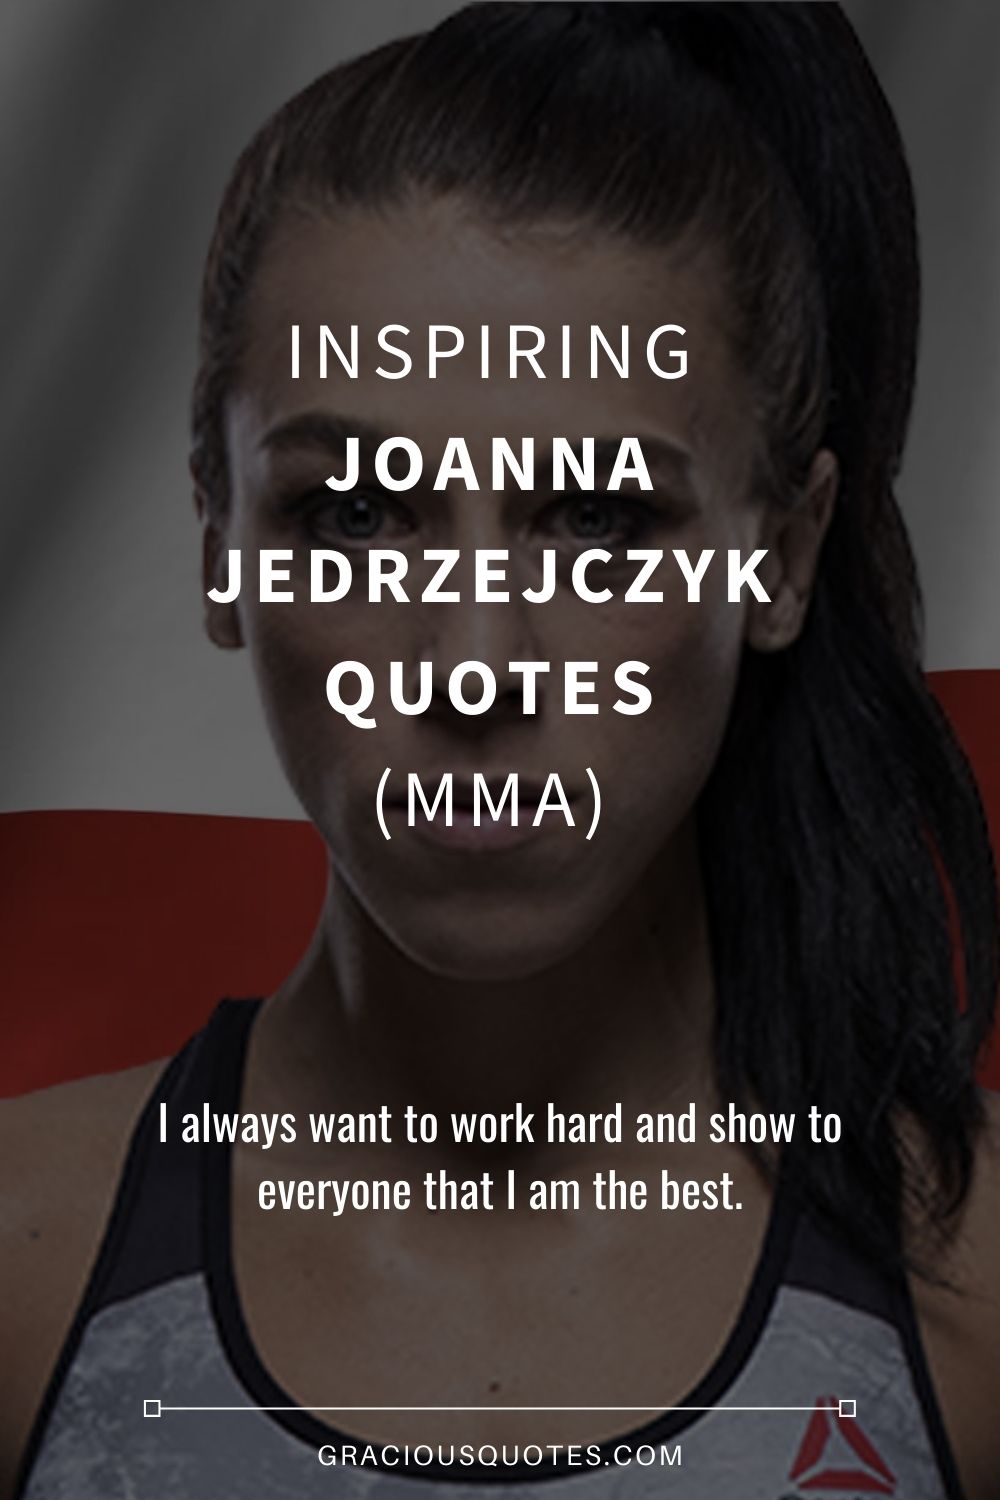 Inspiring Joanna Jedrzejczyk Quotes (MMA) - Gracious Quotes